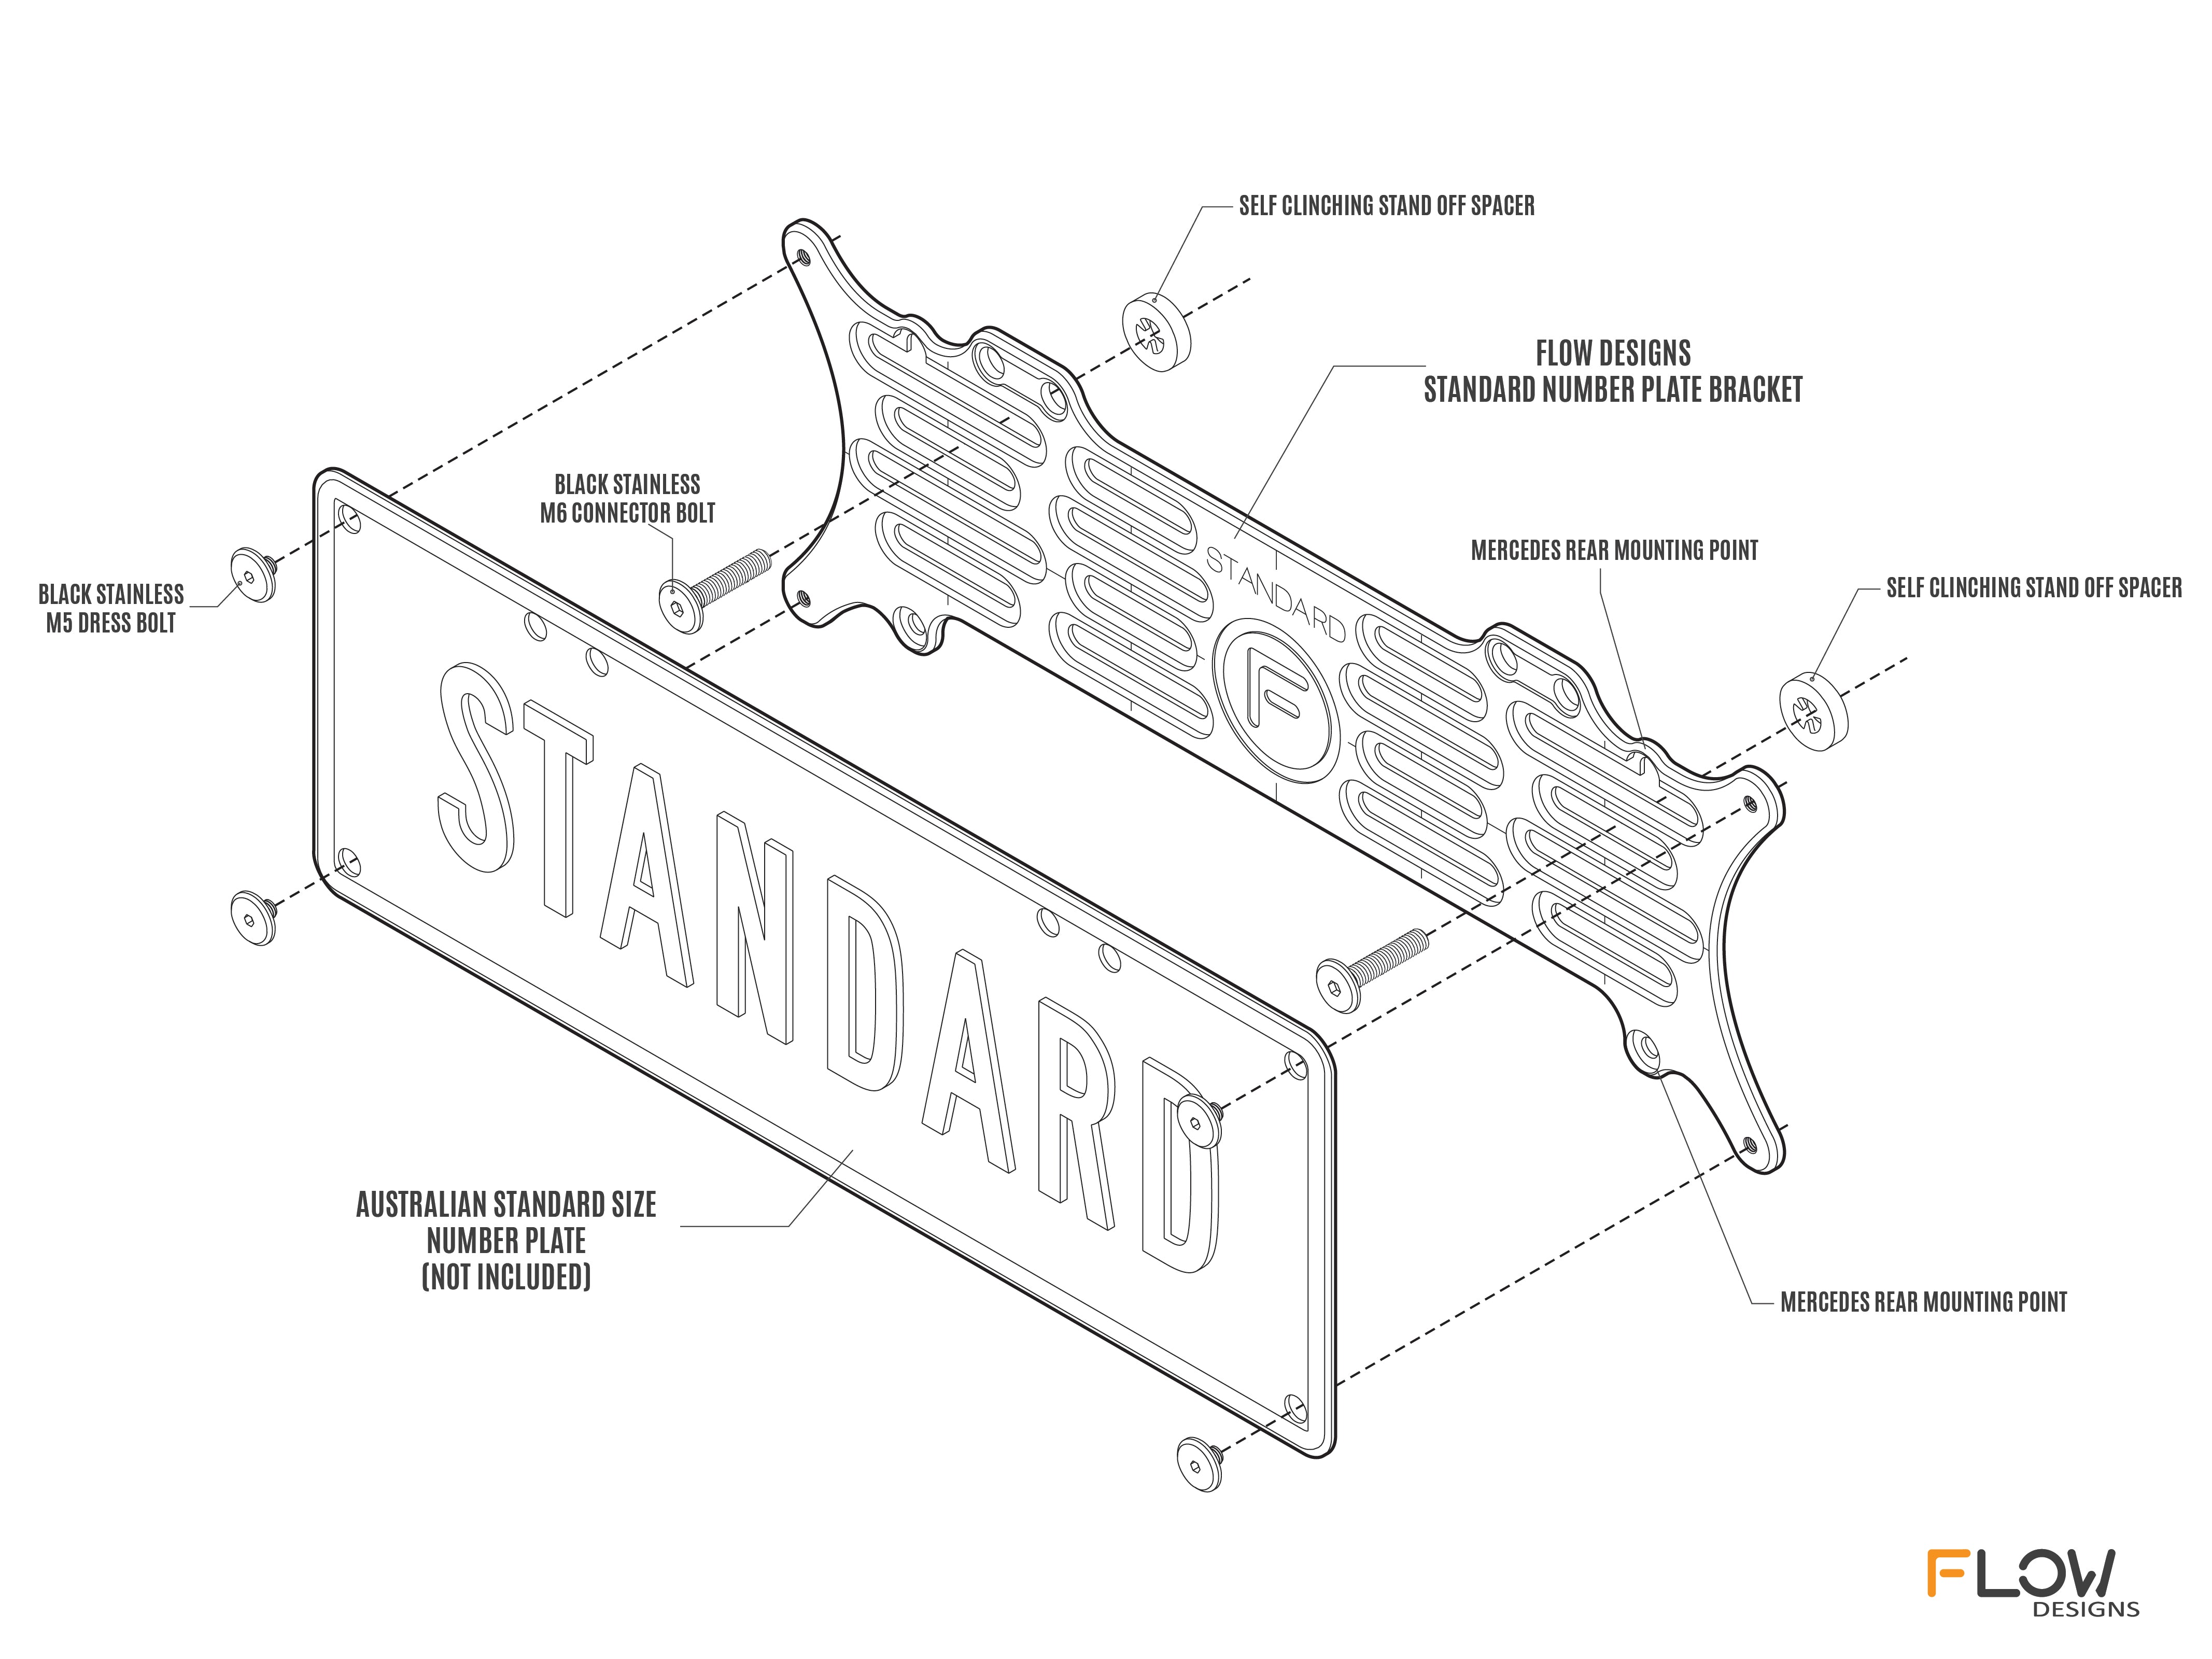 [ACT] Standard - Number Plate Bracket 372mm (w) x 134mm (h)